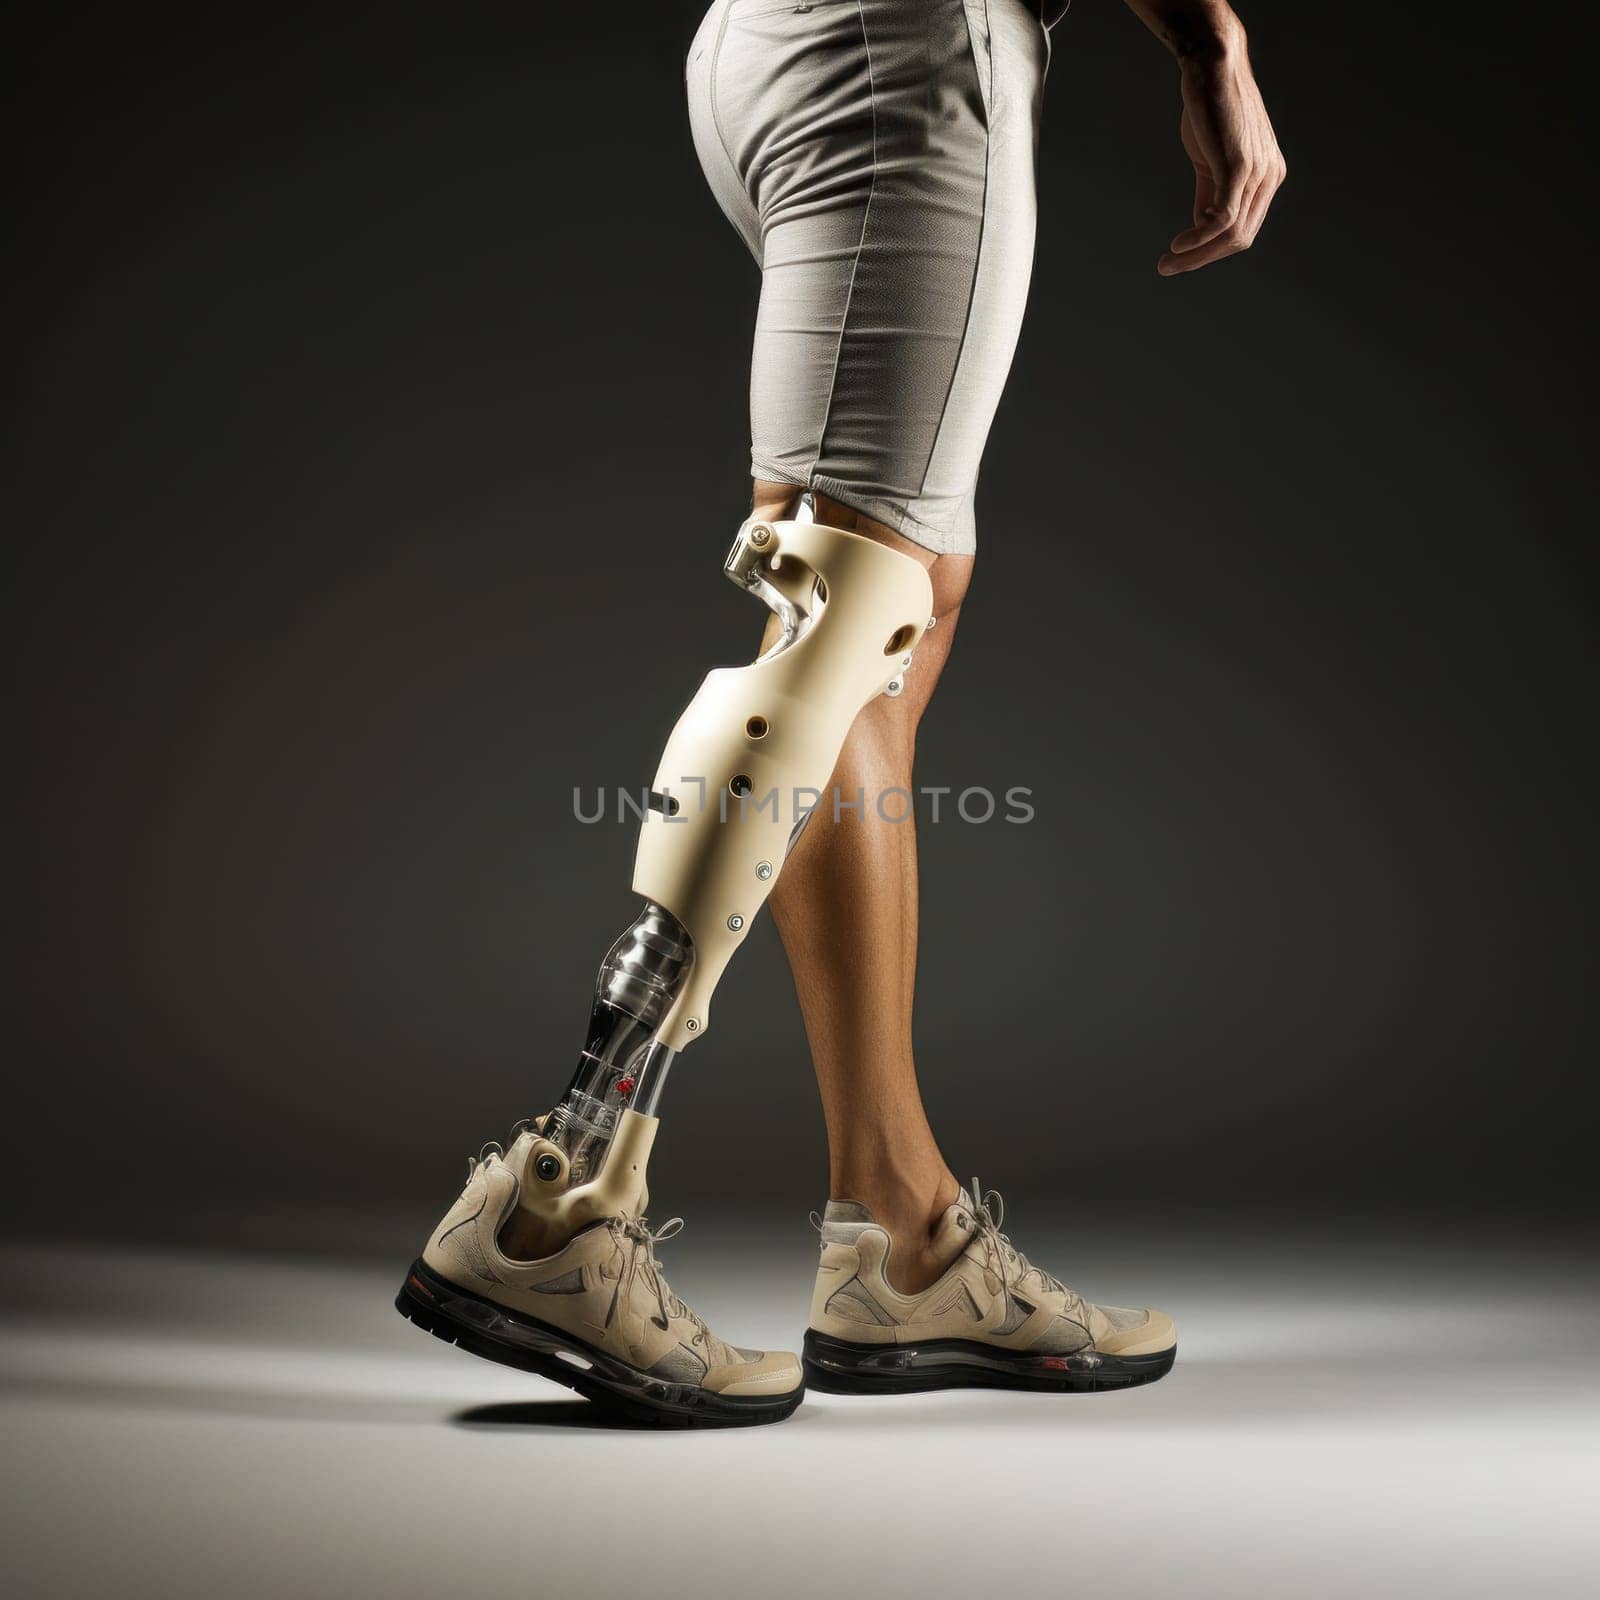 A Man with a Mechanical Prosthetic Leg, A Path to Returning to Active Life by Yurich32